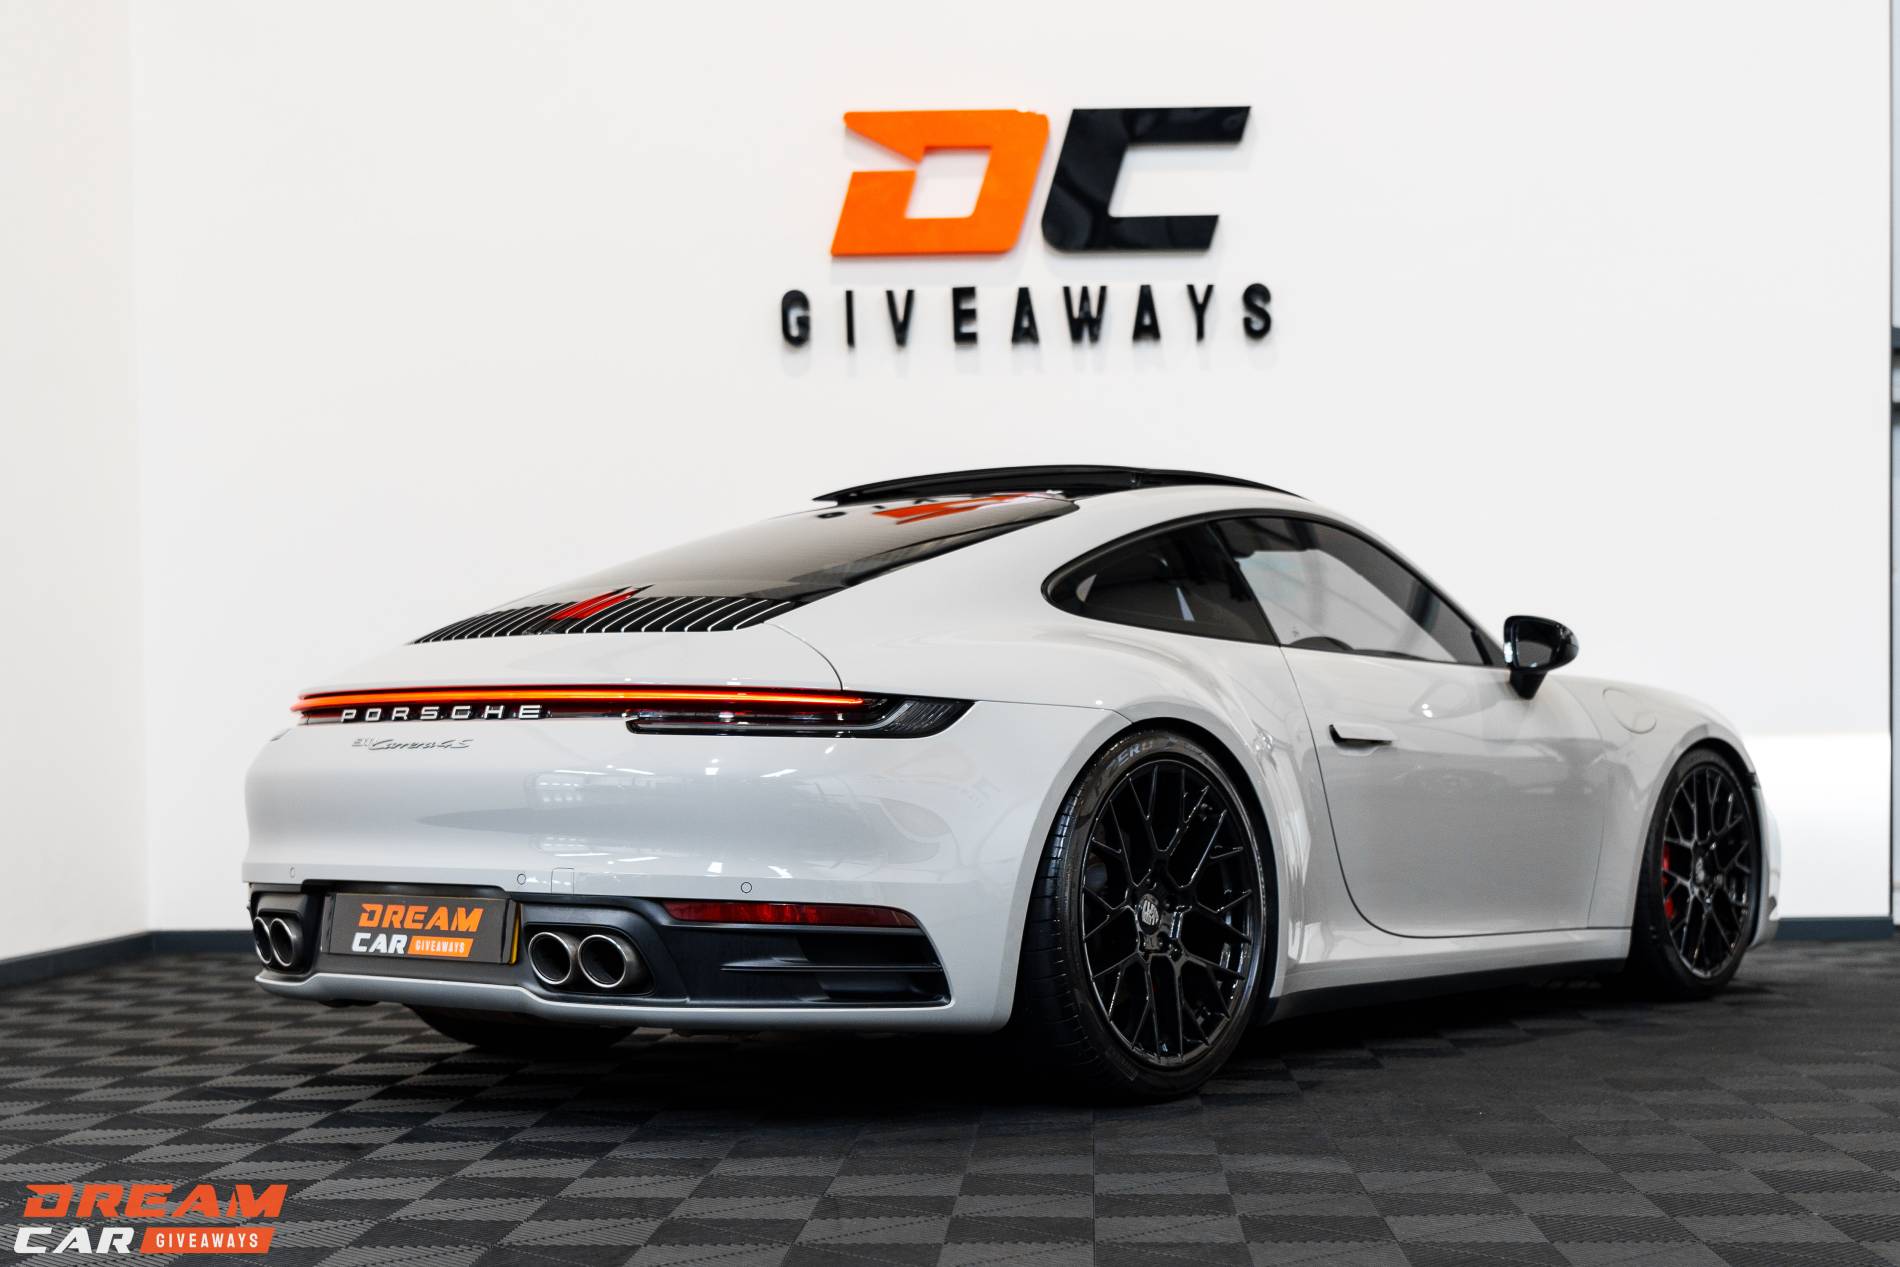 Win This Porsche 911 C4S & £2,000 or £70,000 Tax Free